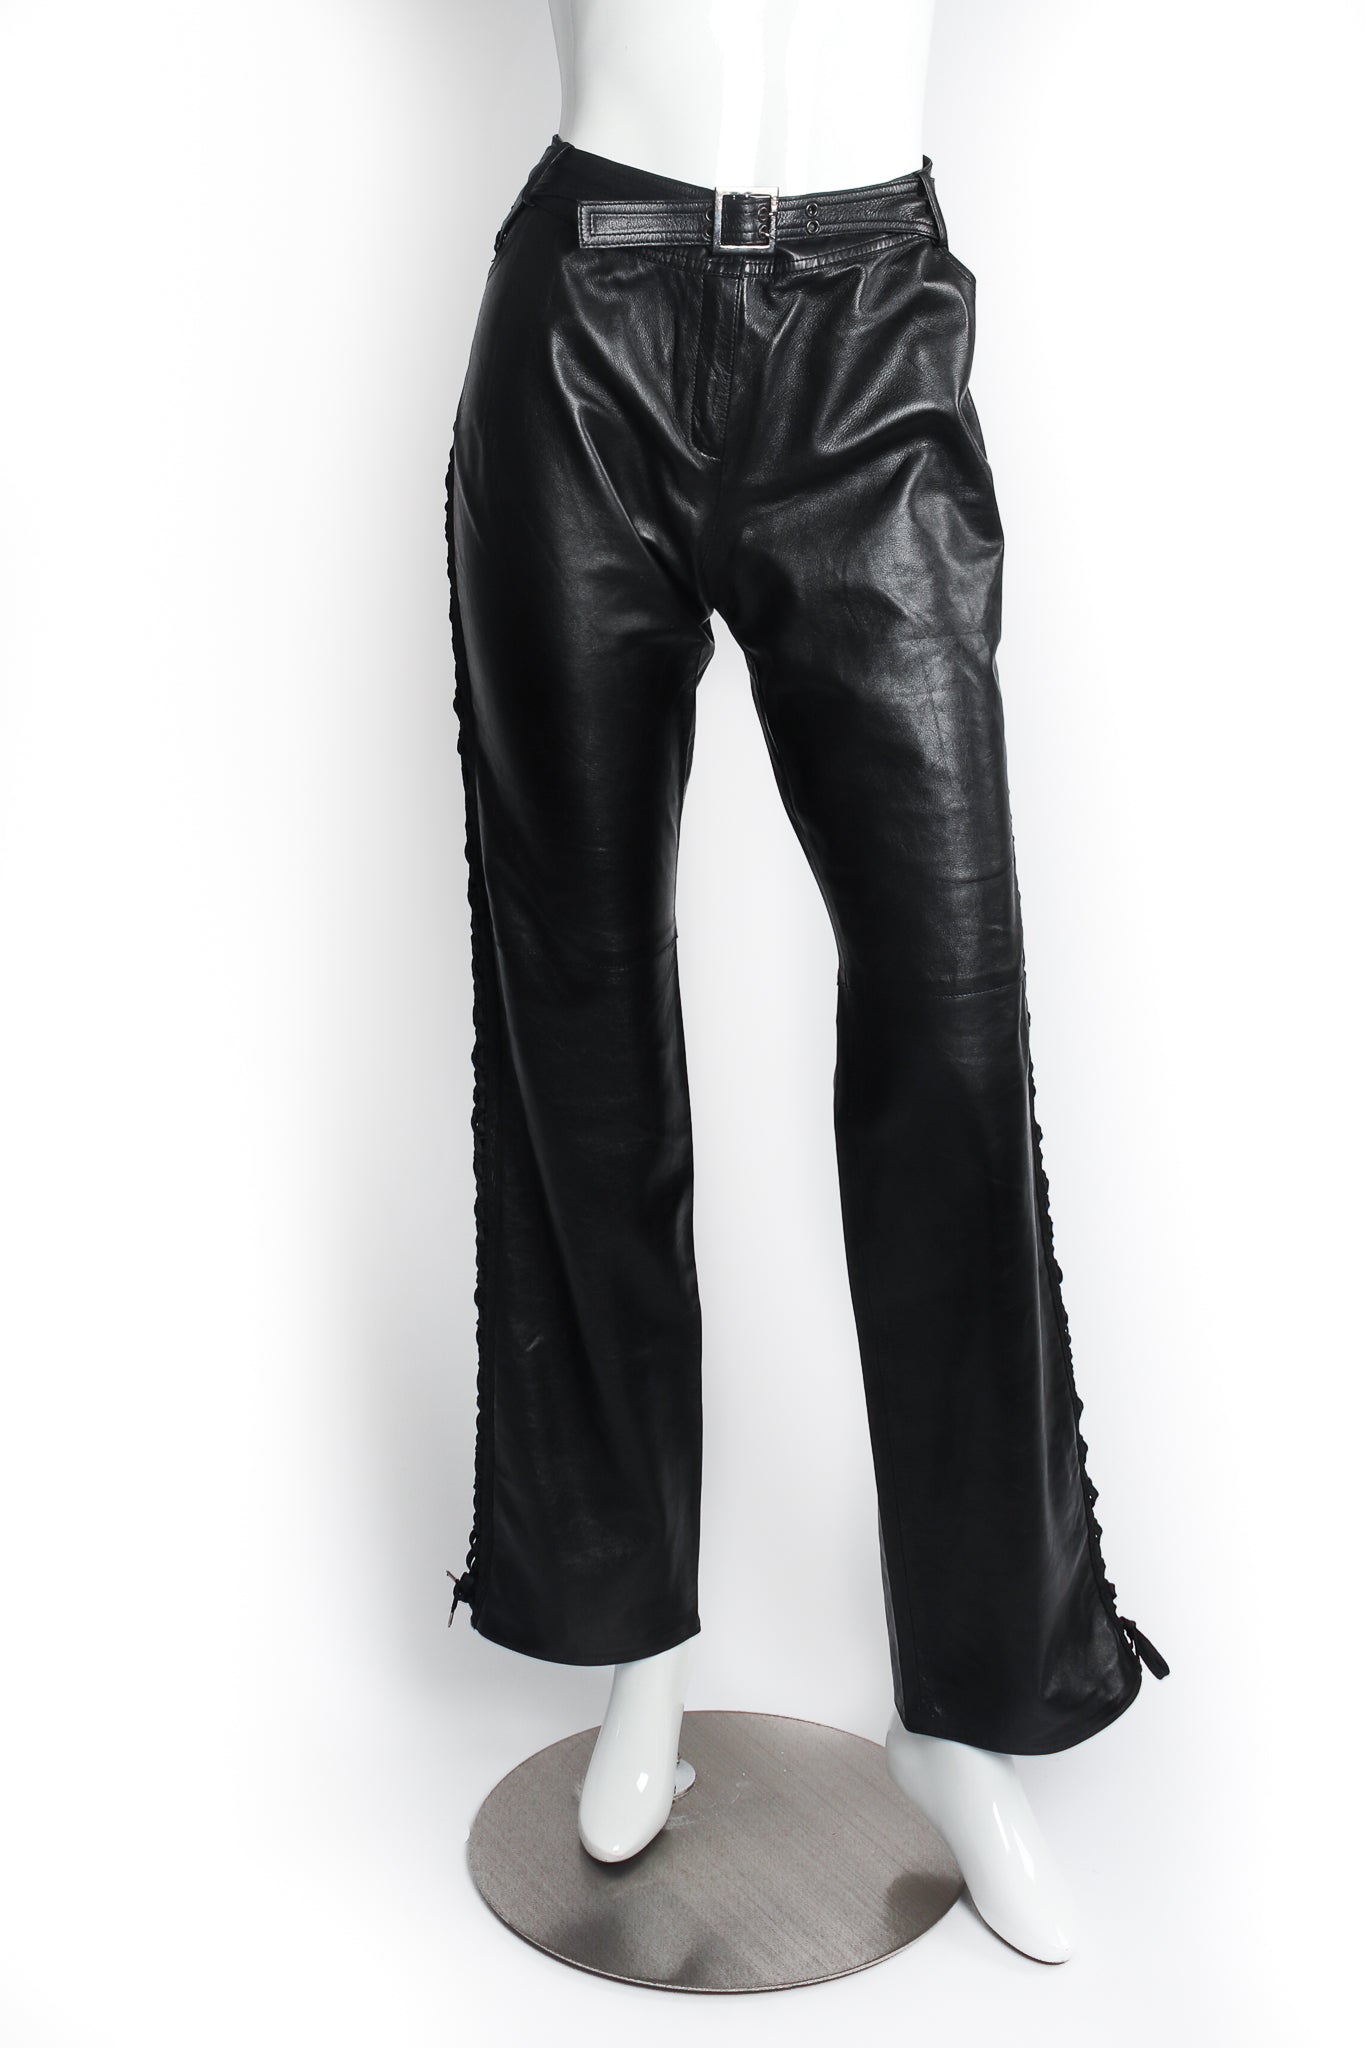 Vintage Christian Dior Leather Tuxedo Lace Plaque Pant on Mannequin front at Recess Los Angeles